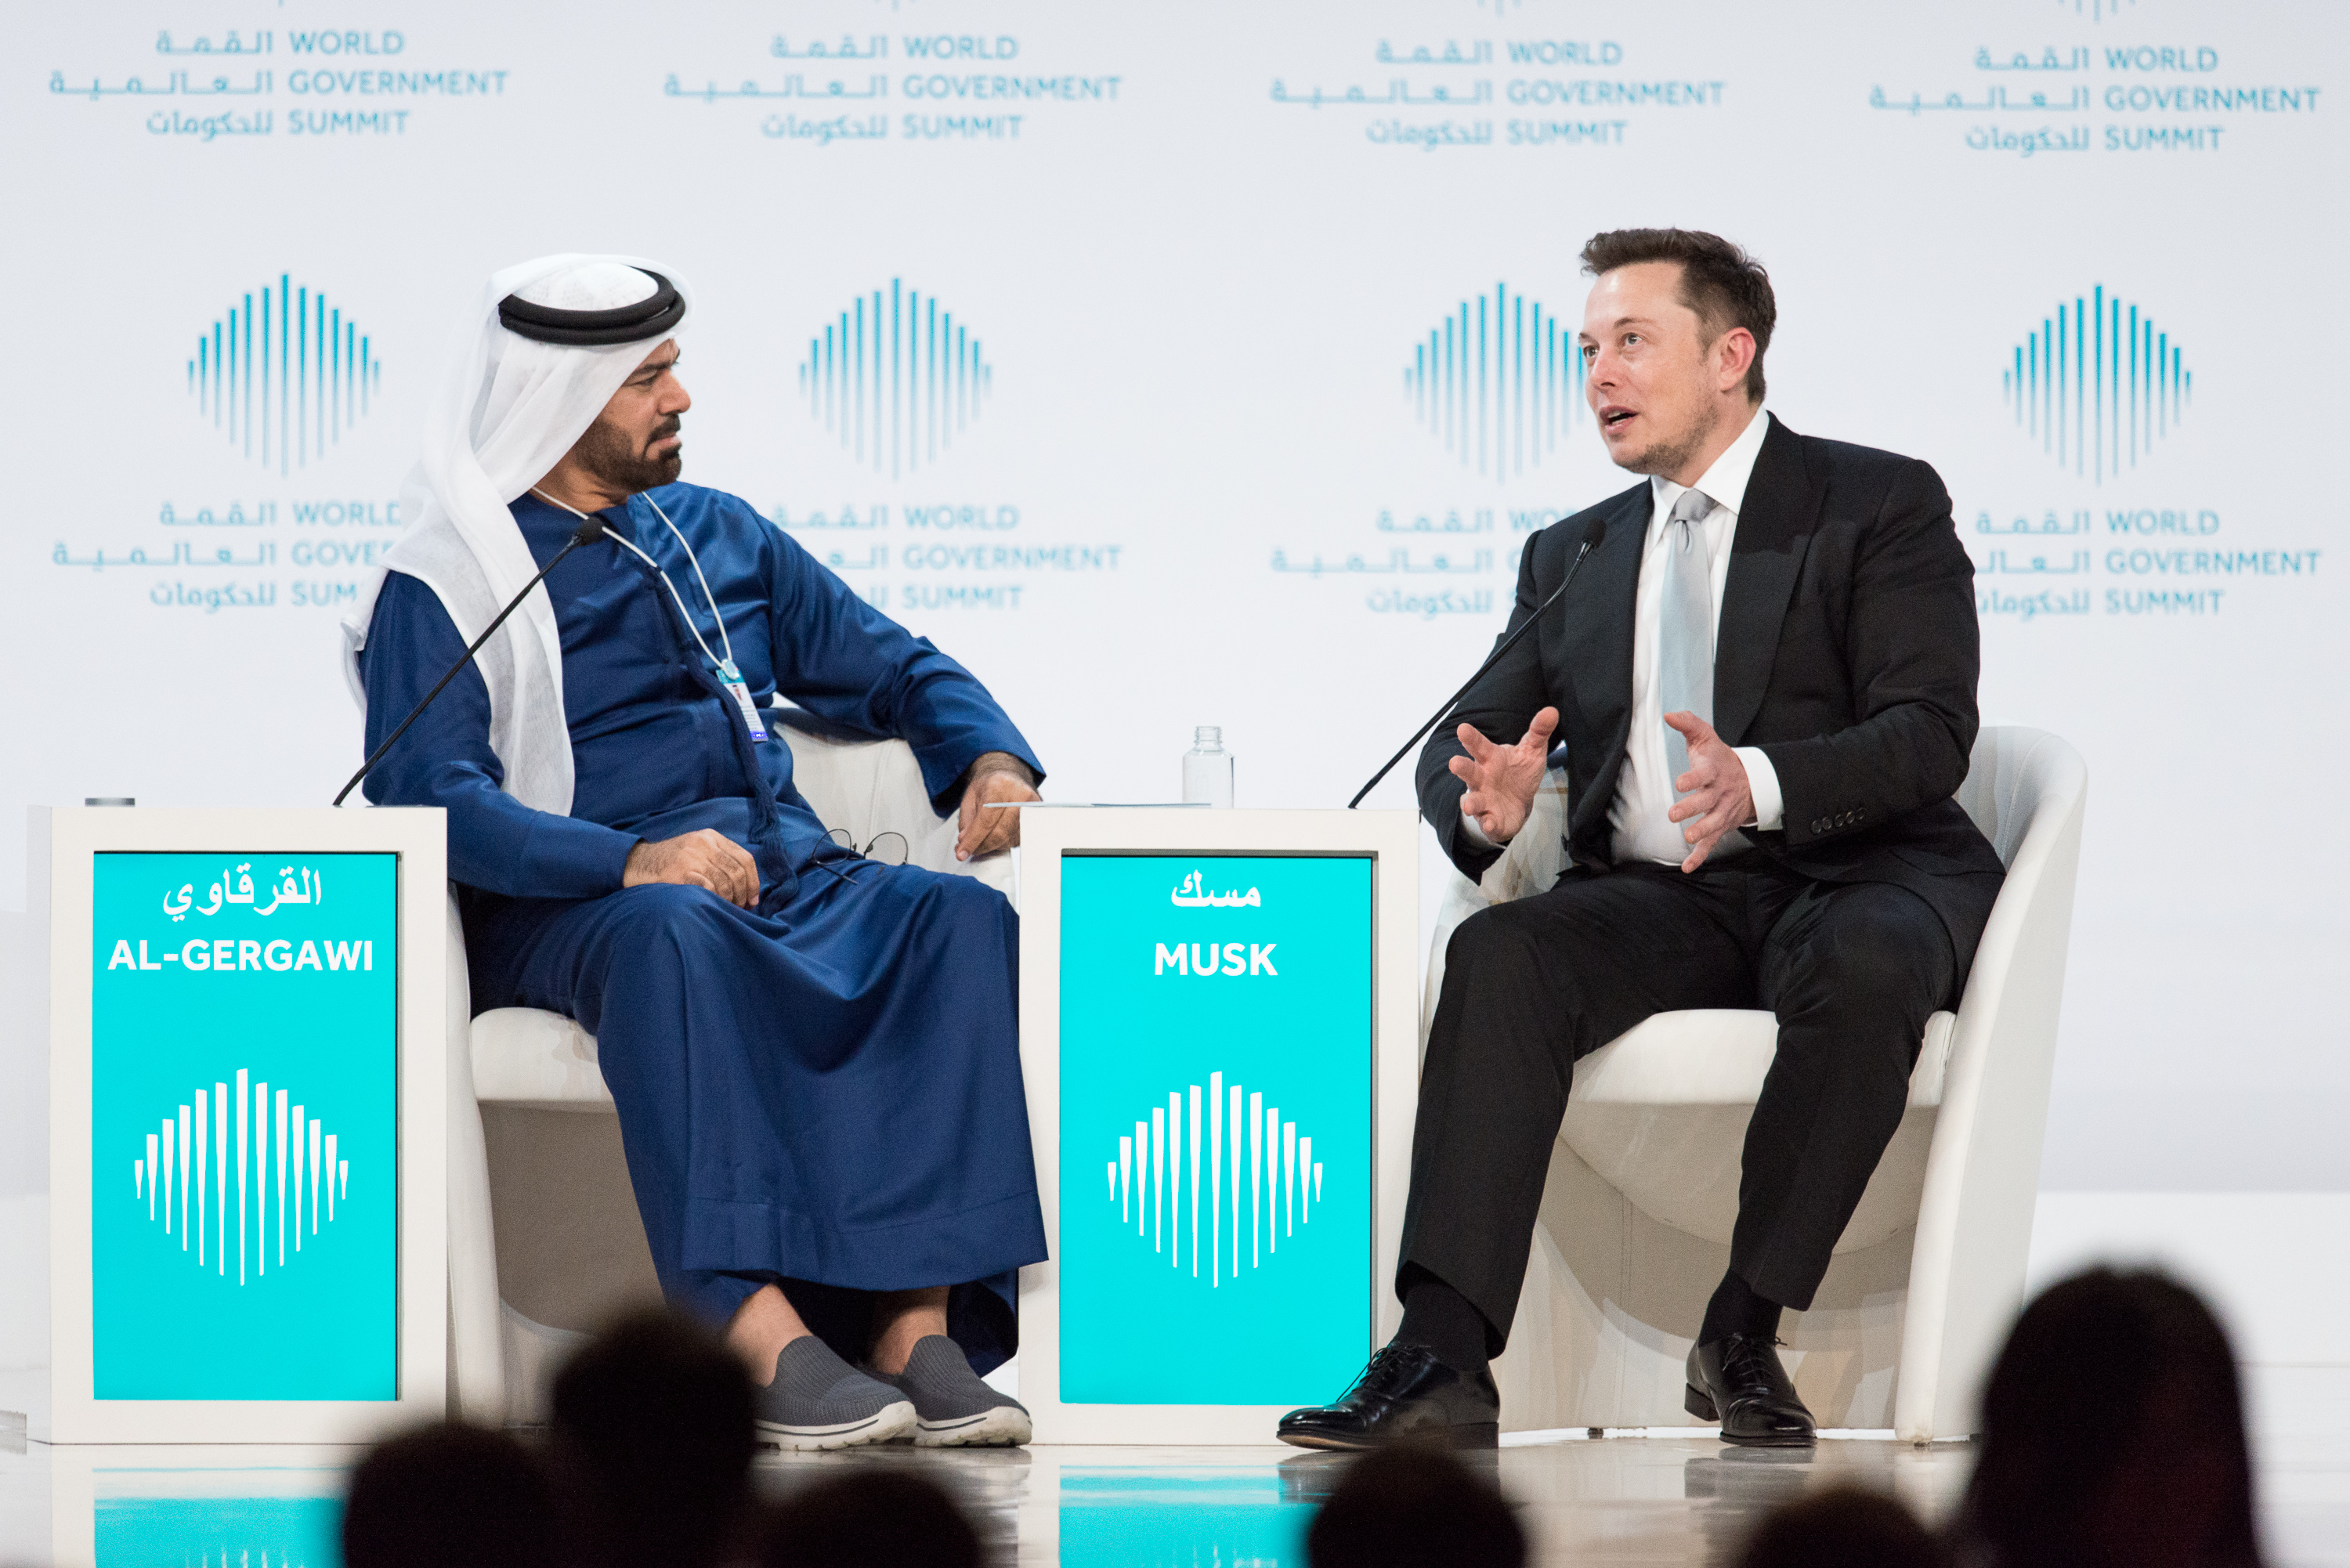 Elon Musk warns global governments about the future